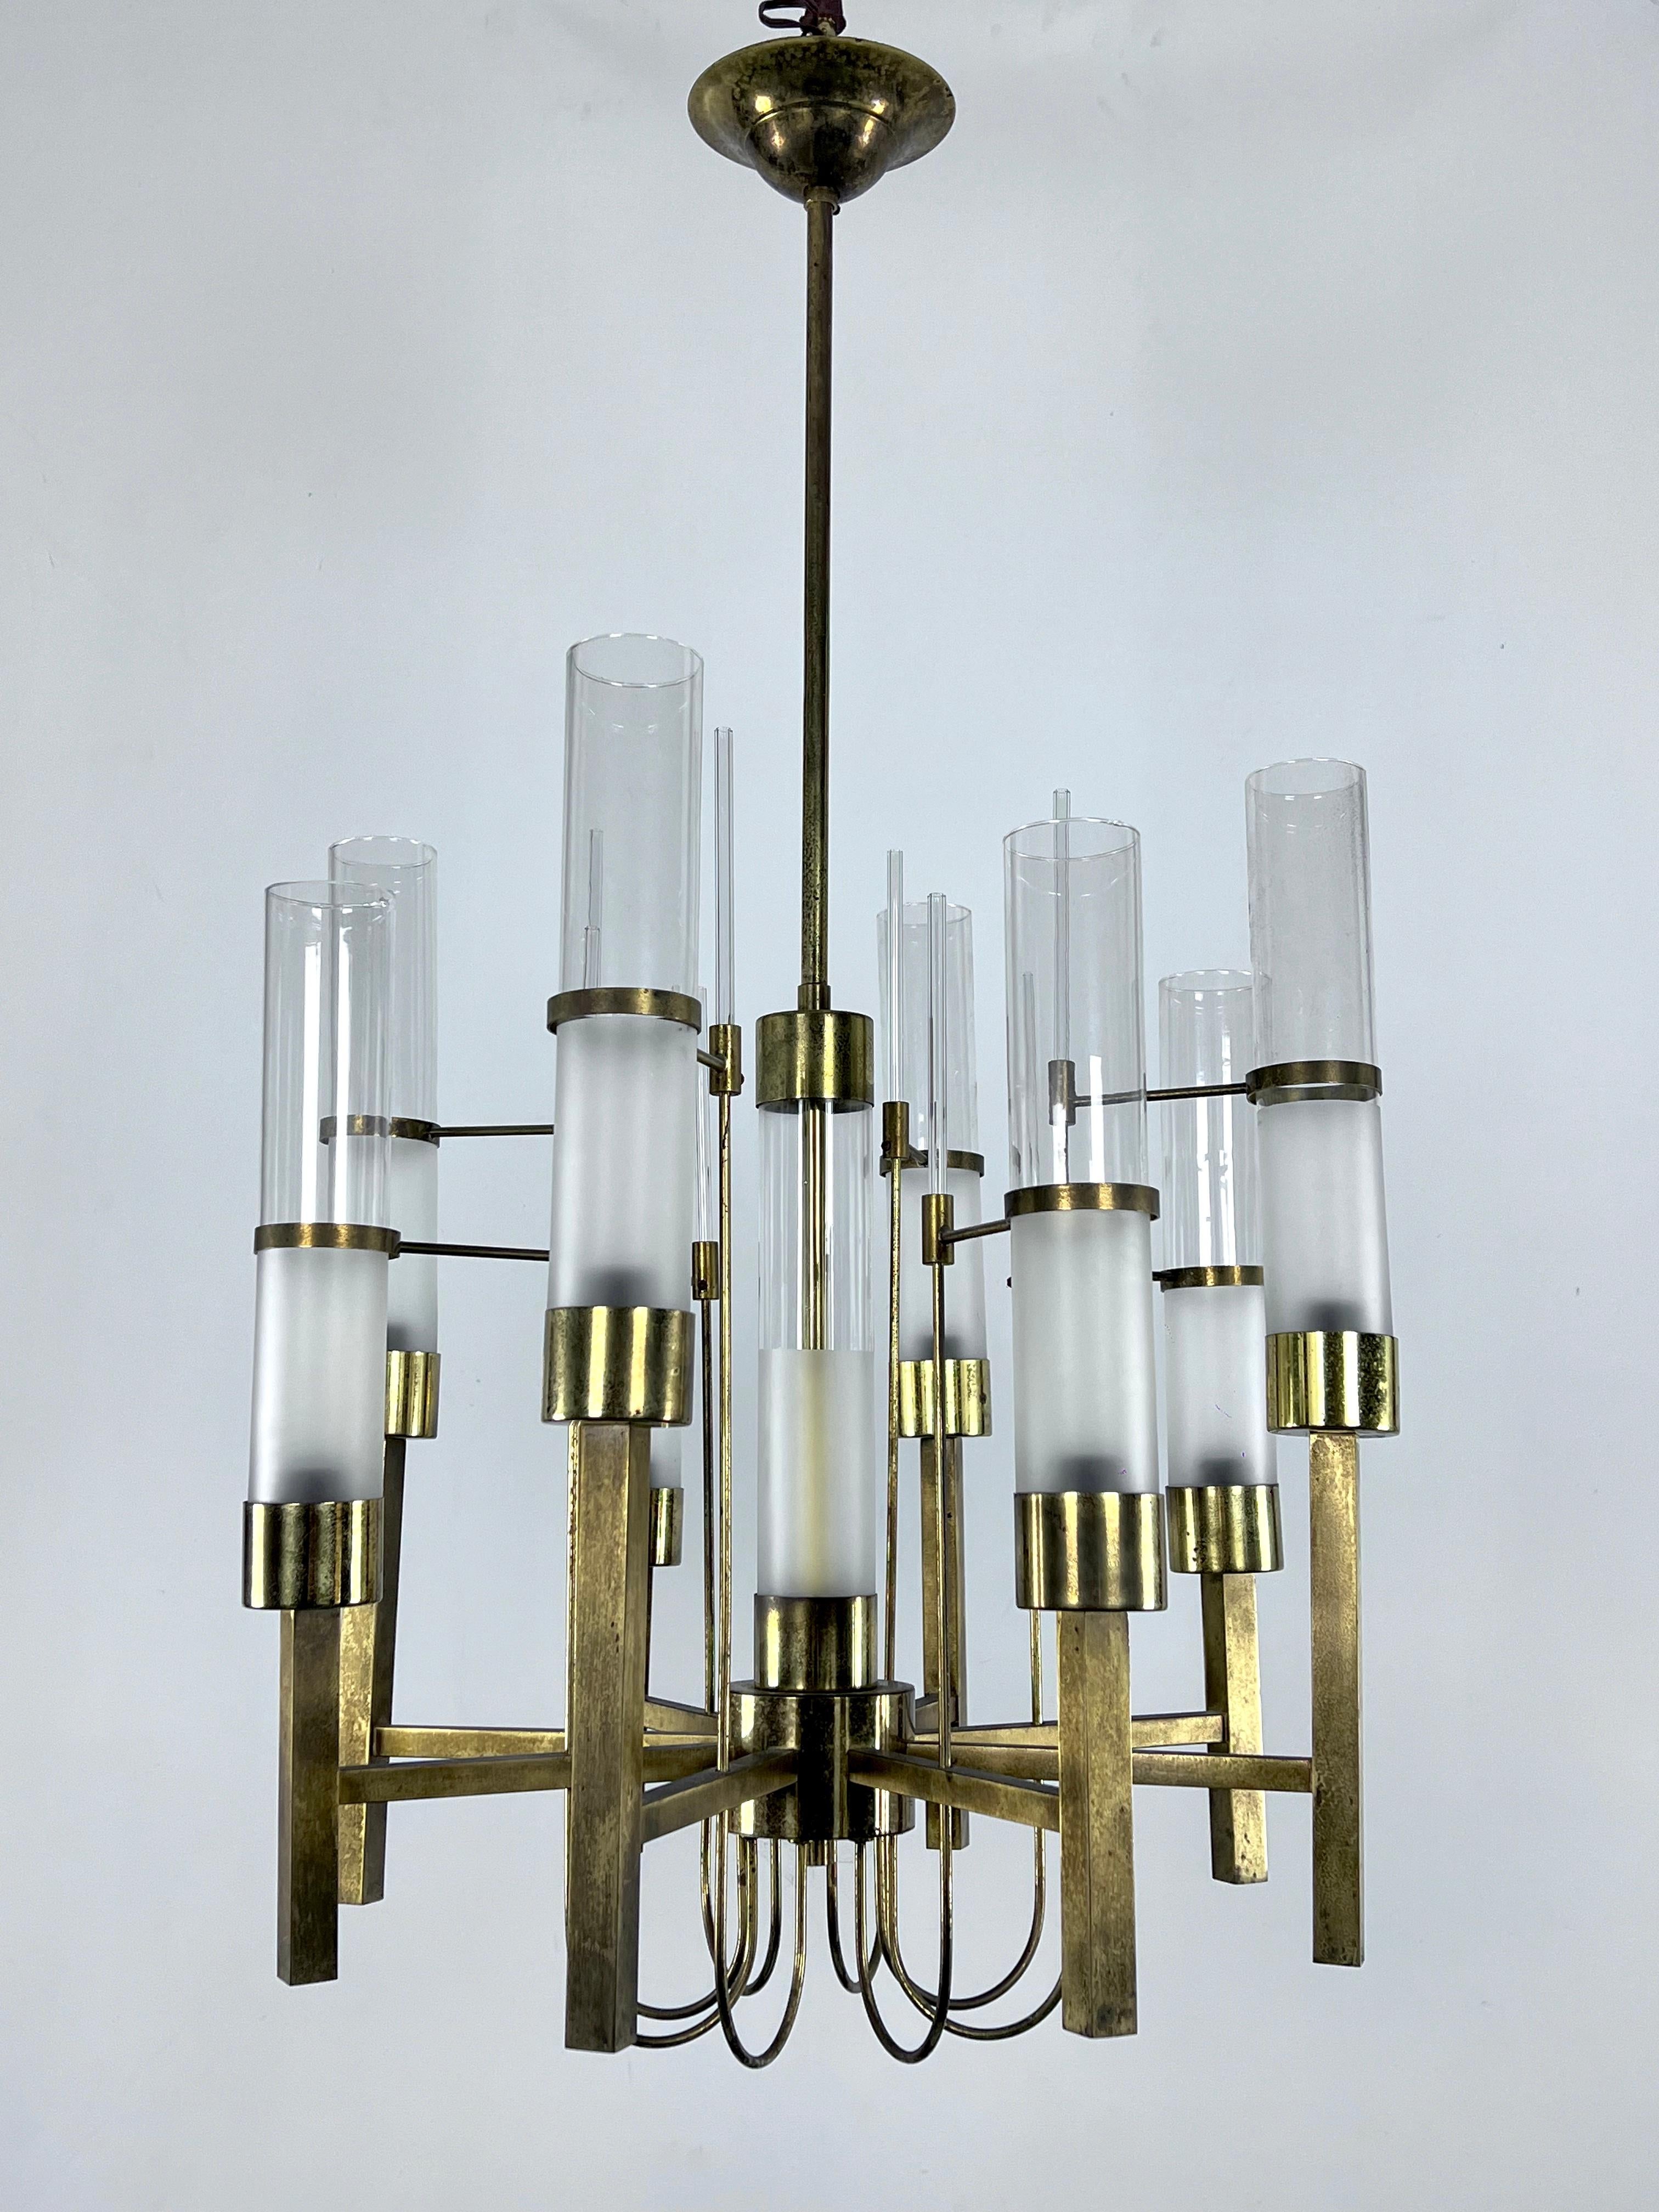 Eight arms brass and glass chandelier produced in Italy by Sciolari. Very good original vintage condition with patina on the brass and normal trace of age and use. No cracks or chips. Height of fixture without rod 49 cm.